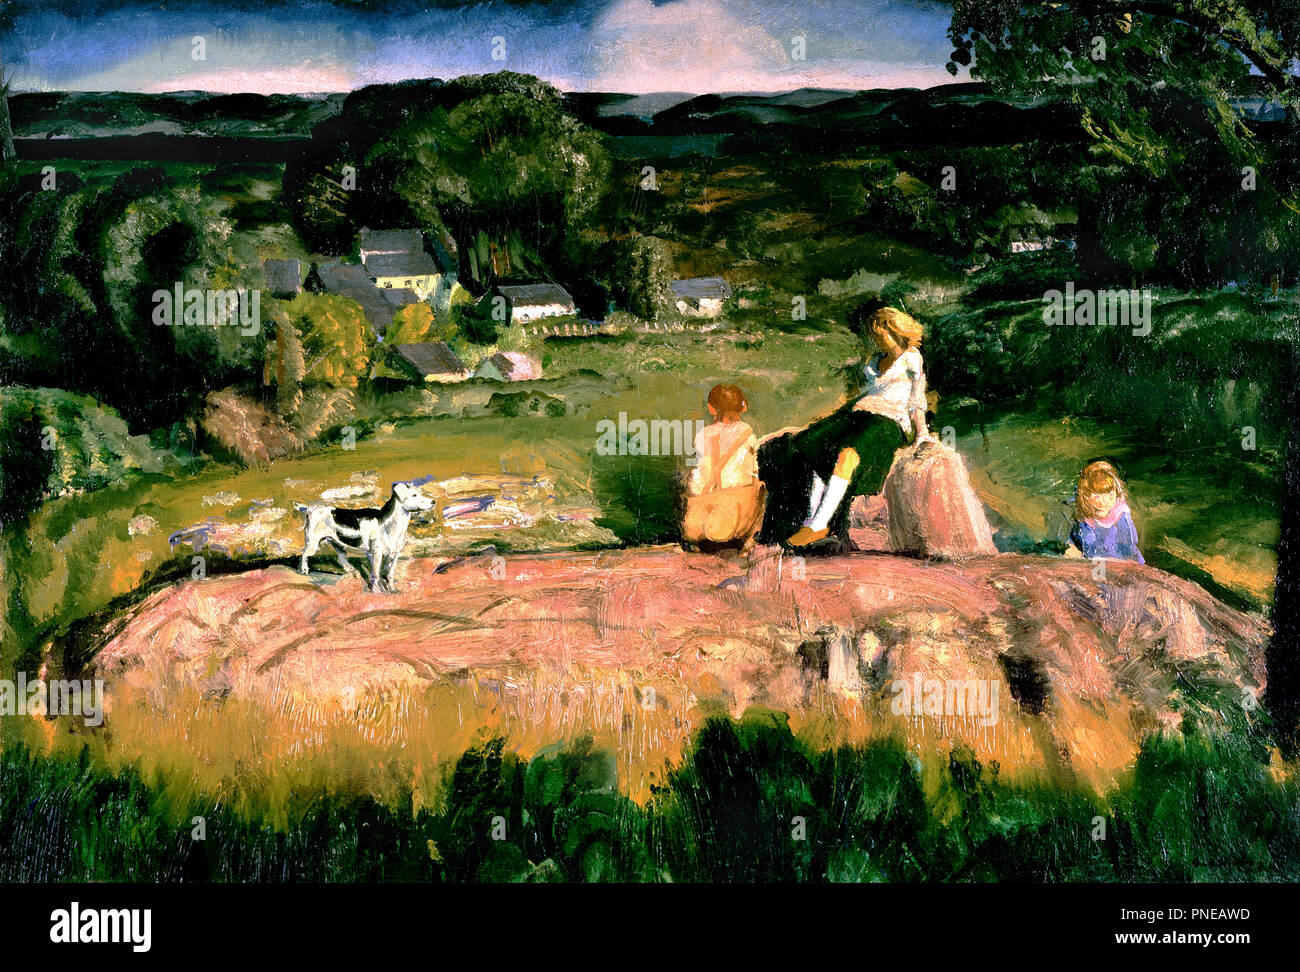 Three Children. Date/Period: June 1919. Painting. Oil on canvas. Height: 77.2 cm (30.3 in); Width: 112.2 cm (44.1 in). Author: George Bellows. Stock Photo